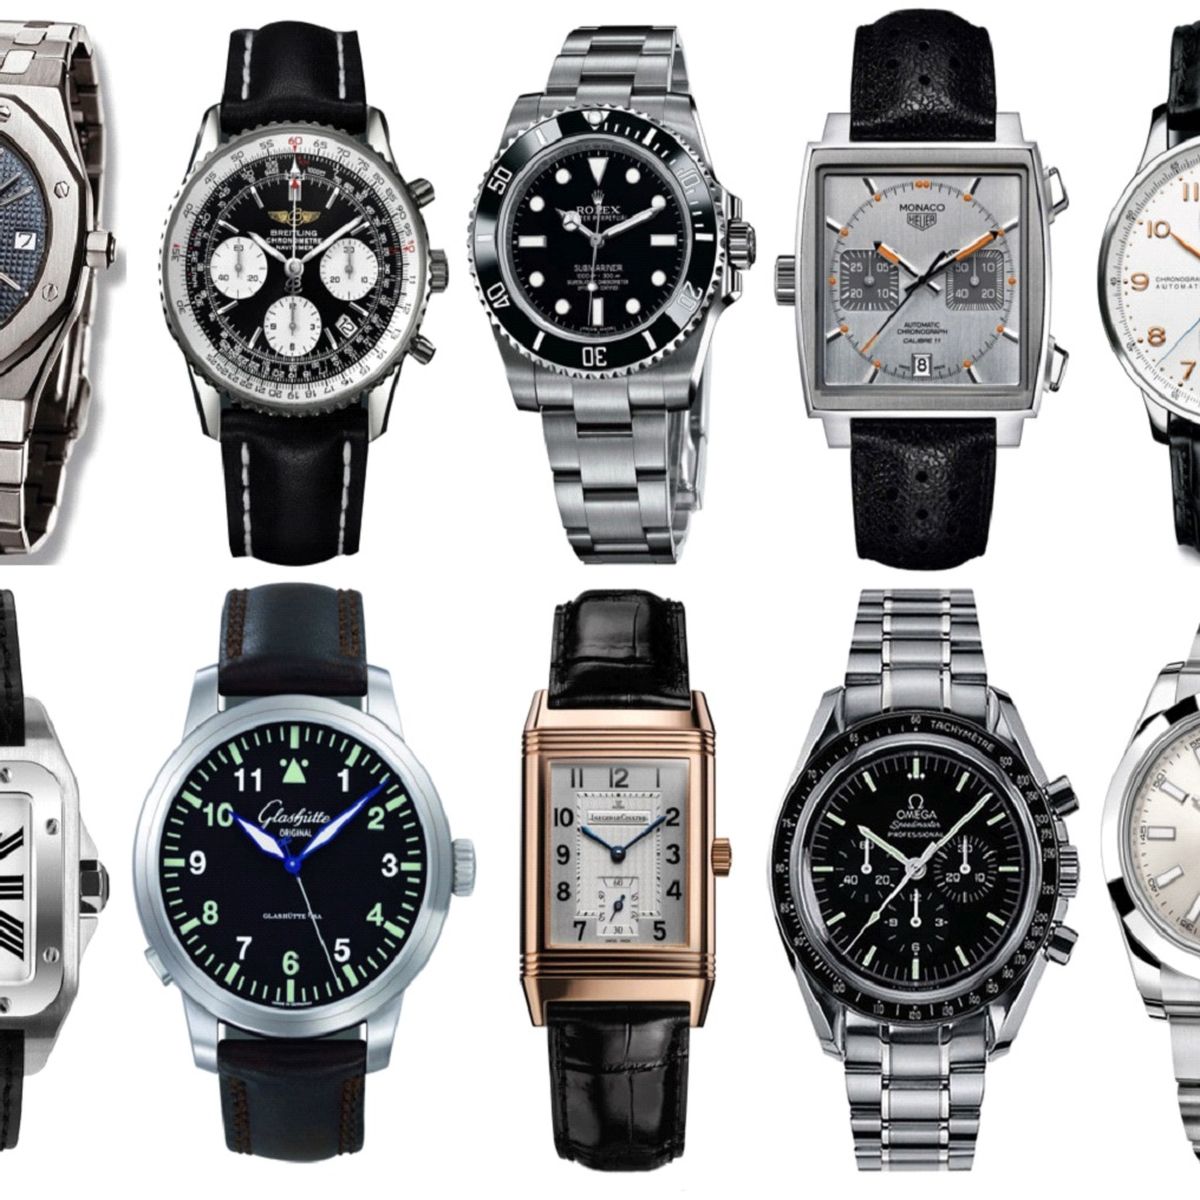 Buy a Luxury Watch for Your Graduate